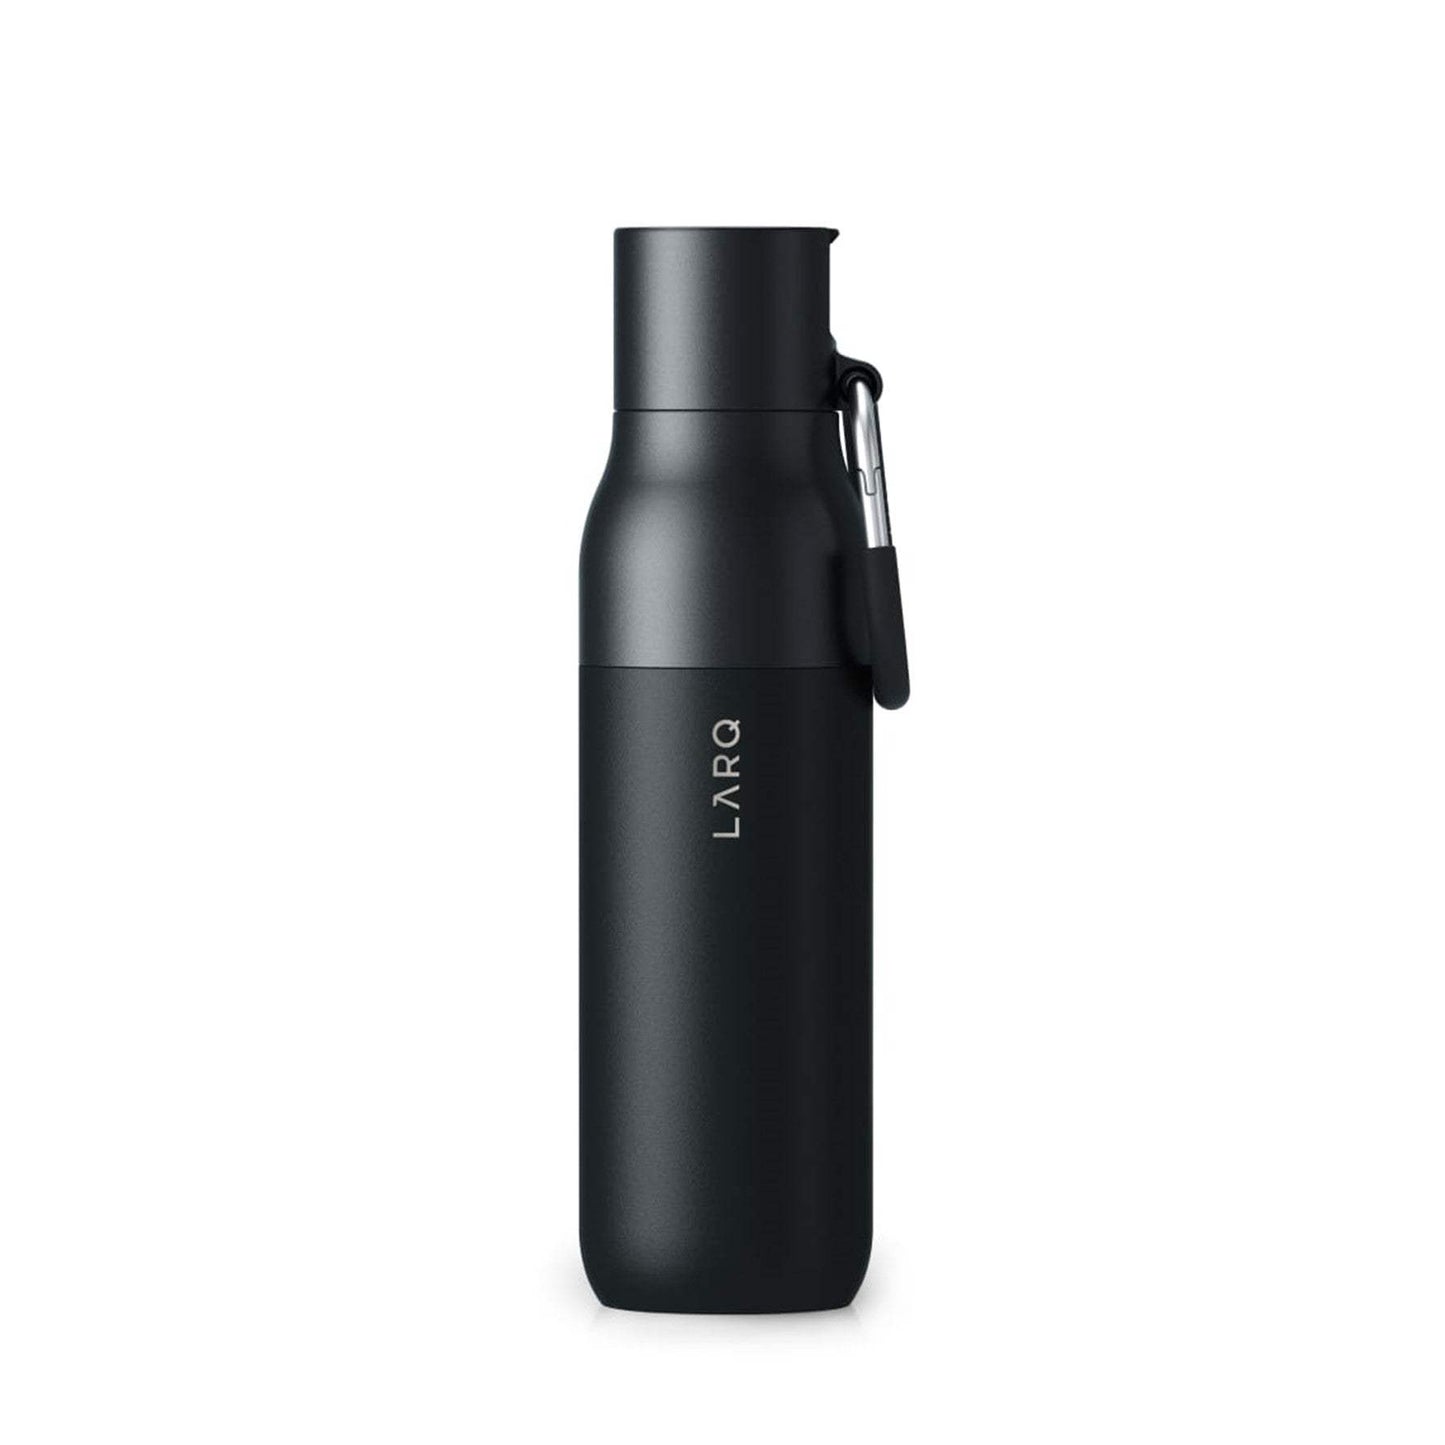 LARQ Bottle Filtered 500ml - The Luxury Promotional Gifts Company Limited